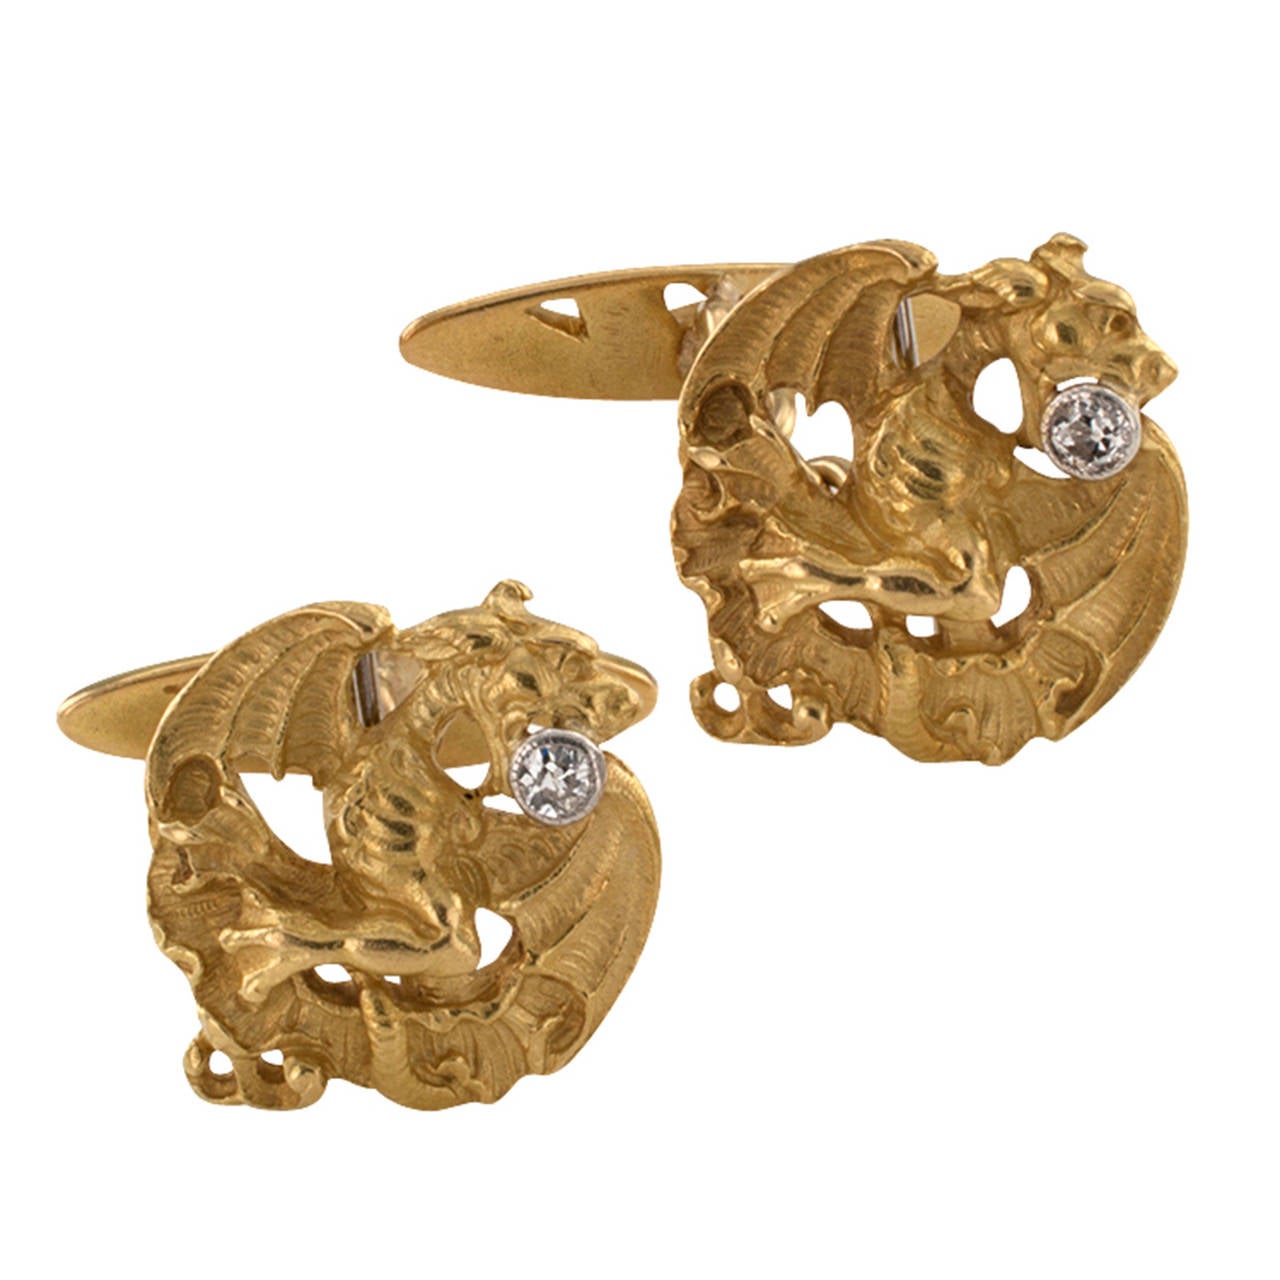 Art Nouveau Griffin Cuff Links With Diamonds

A pair of three dimensional  fierce griffins executed in great detail, completed by back supports embellished with classic organic motifs prevalent in Art Nouveau jewels.  The matching designs feature